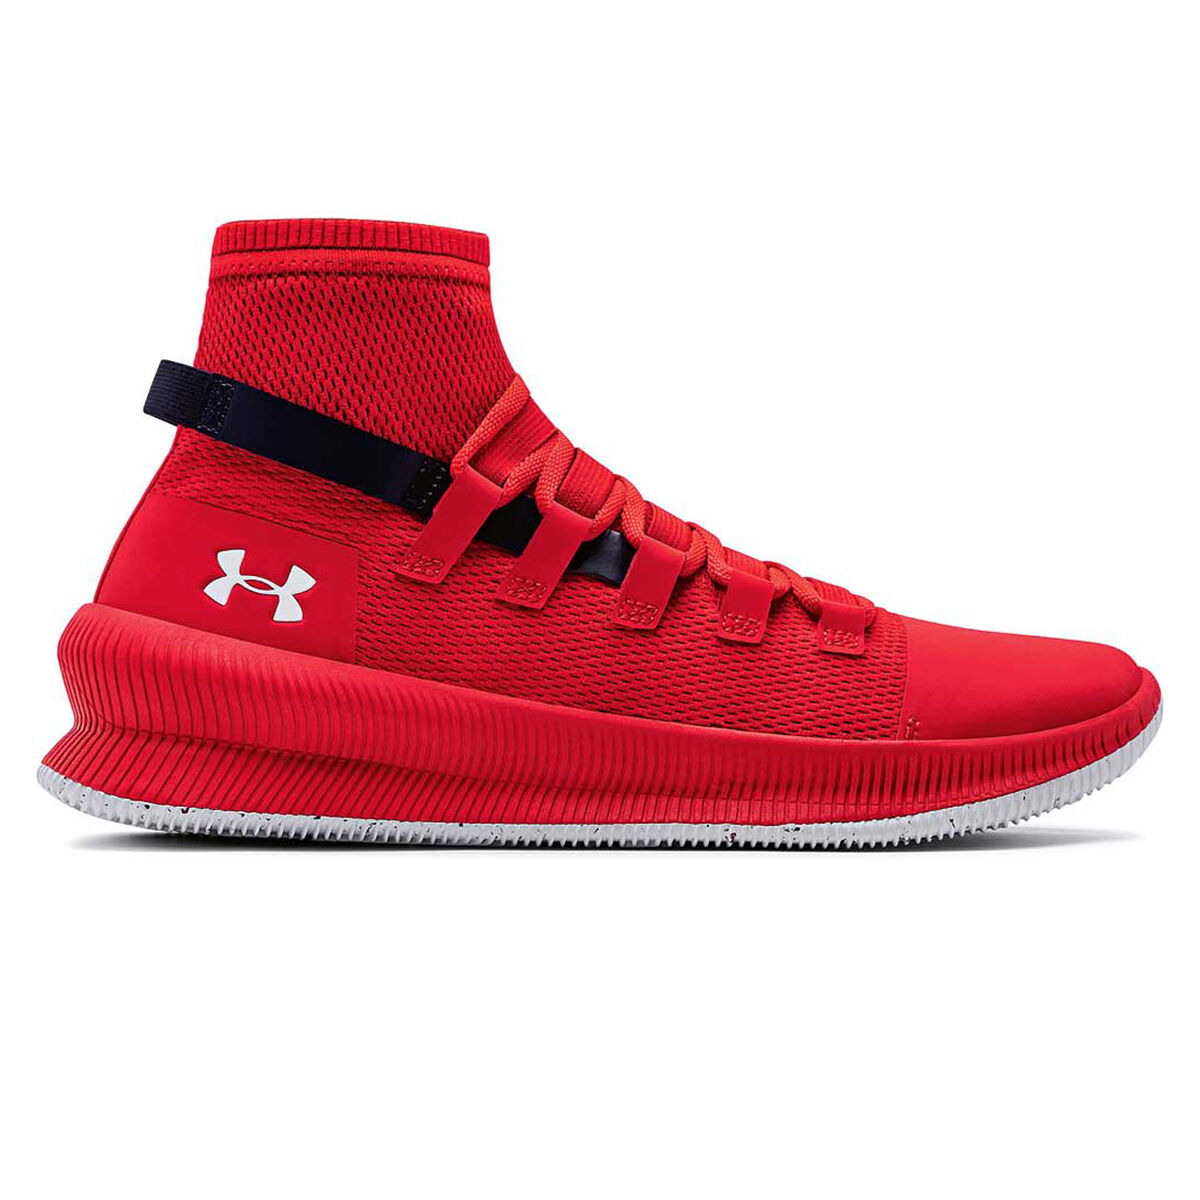 under armour basketball shoes pink